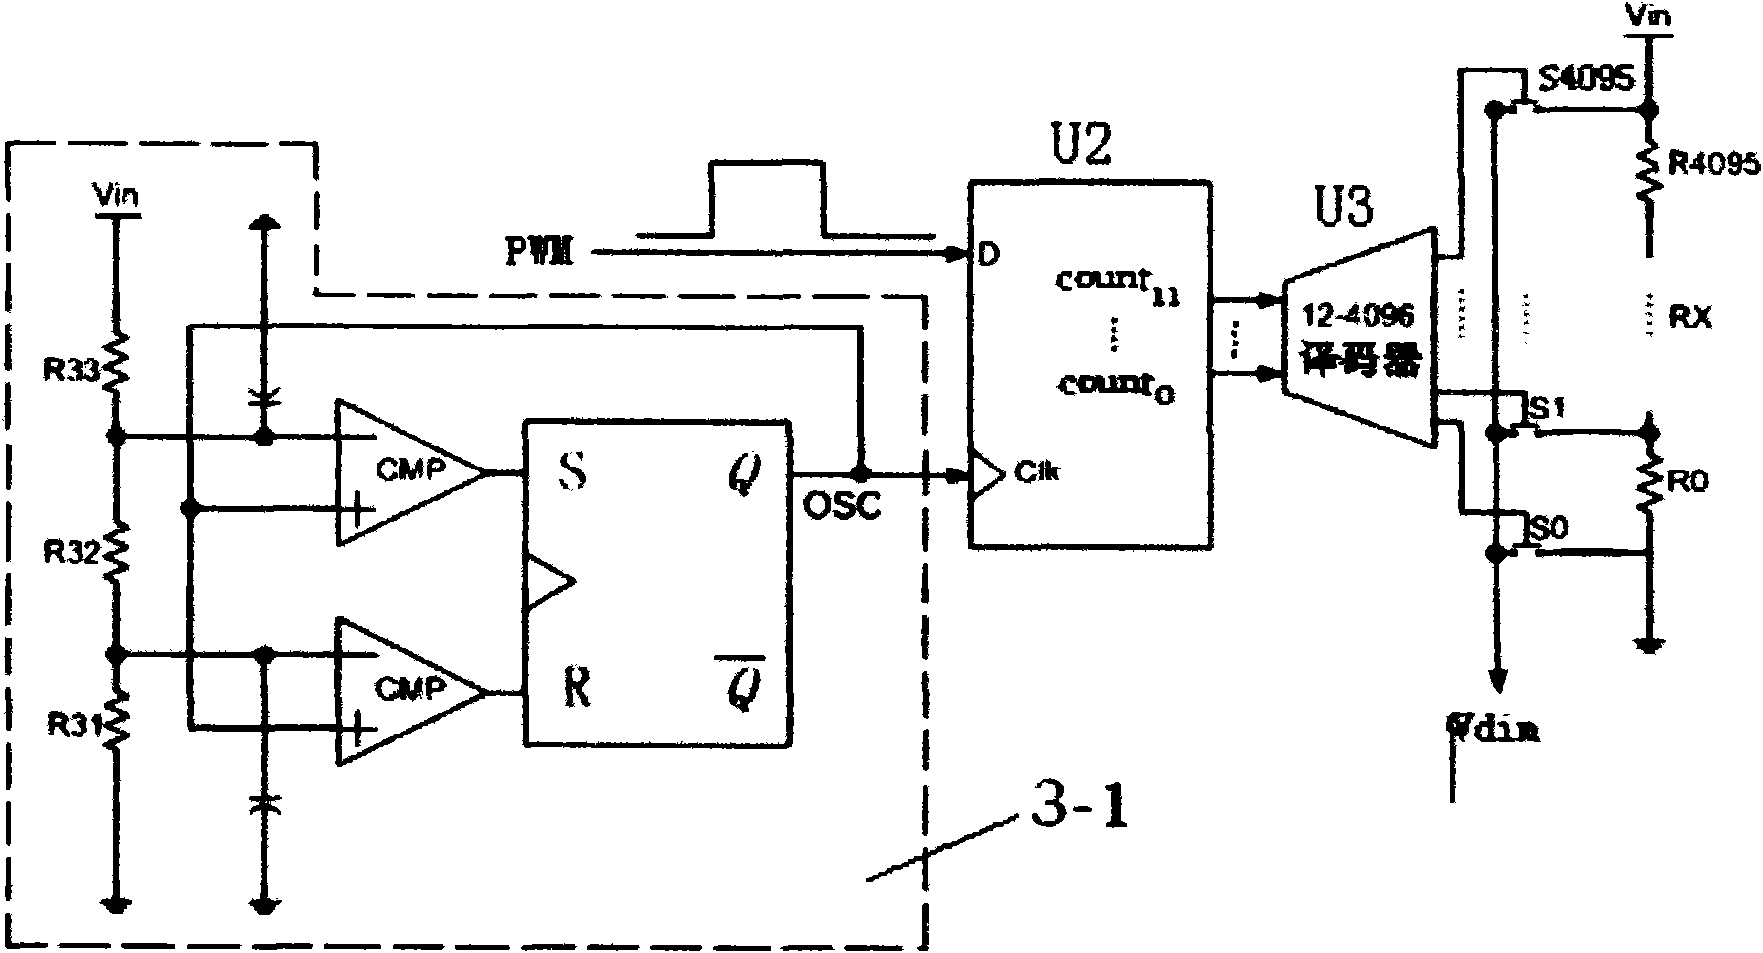 LED constant current drive circuit with light dimming function